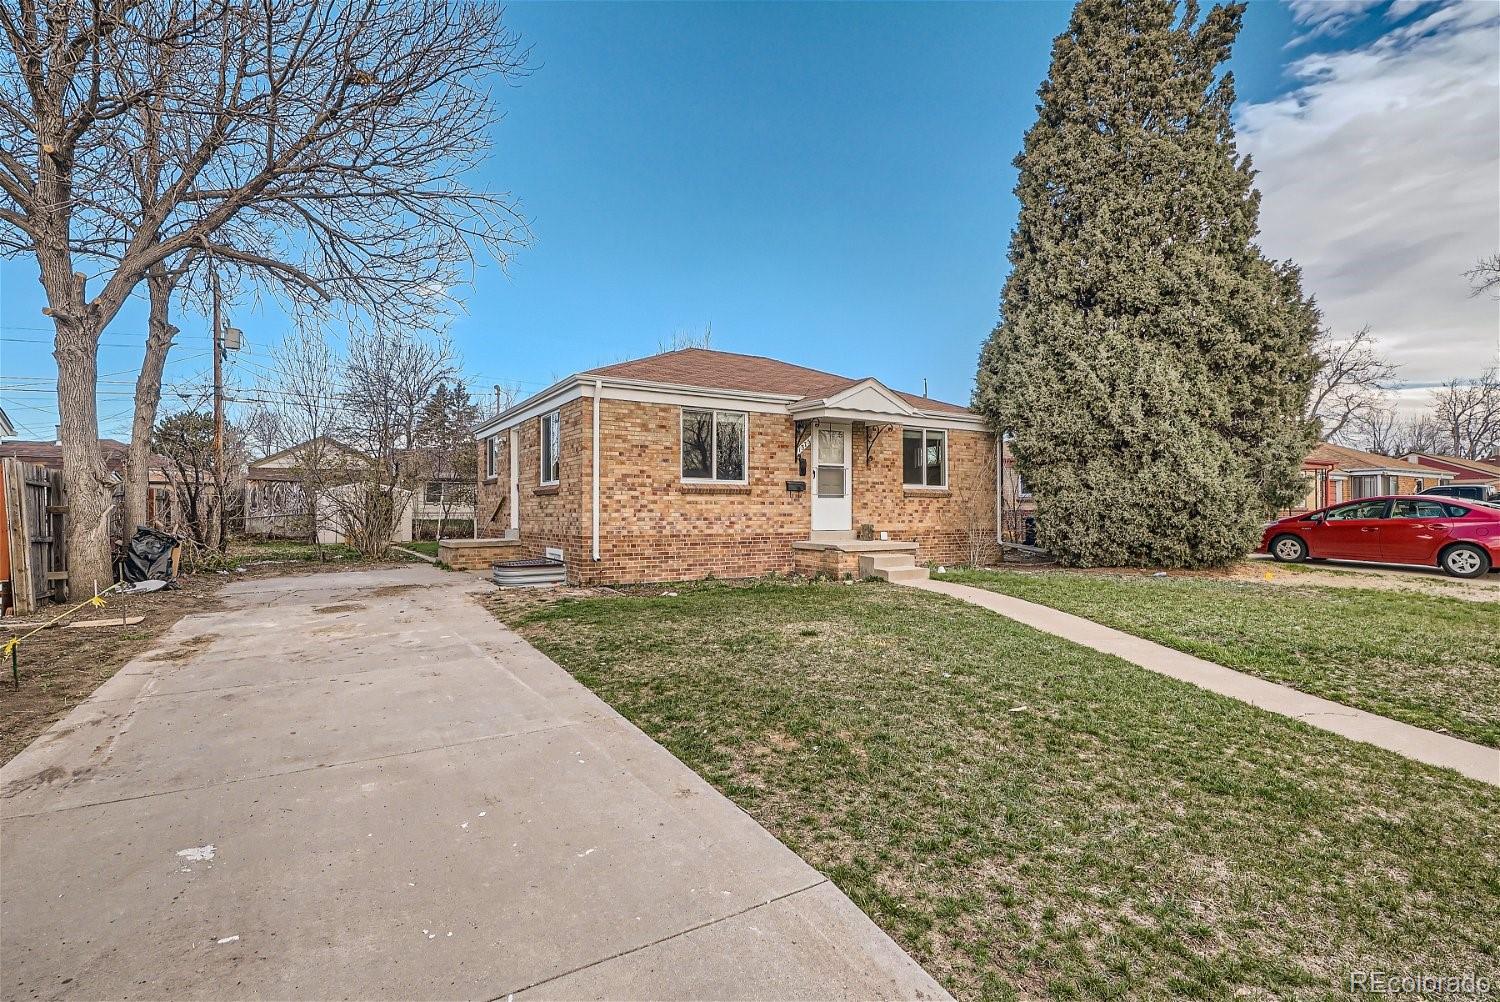 1375 s dale court, denver sold home. Closed on 2024-05-28 for $552,000.